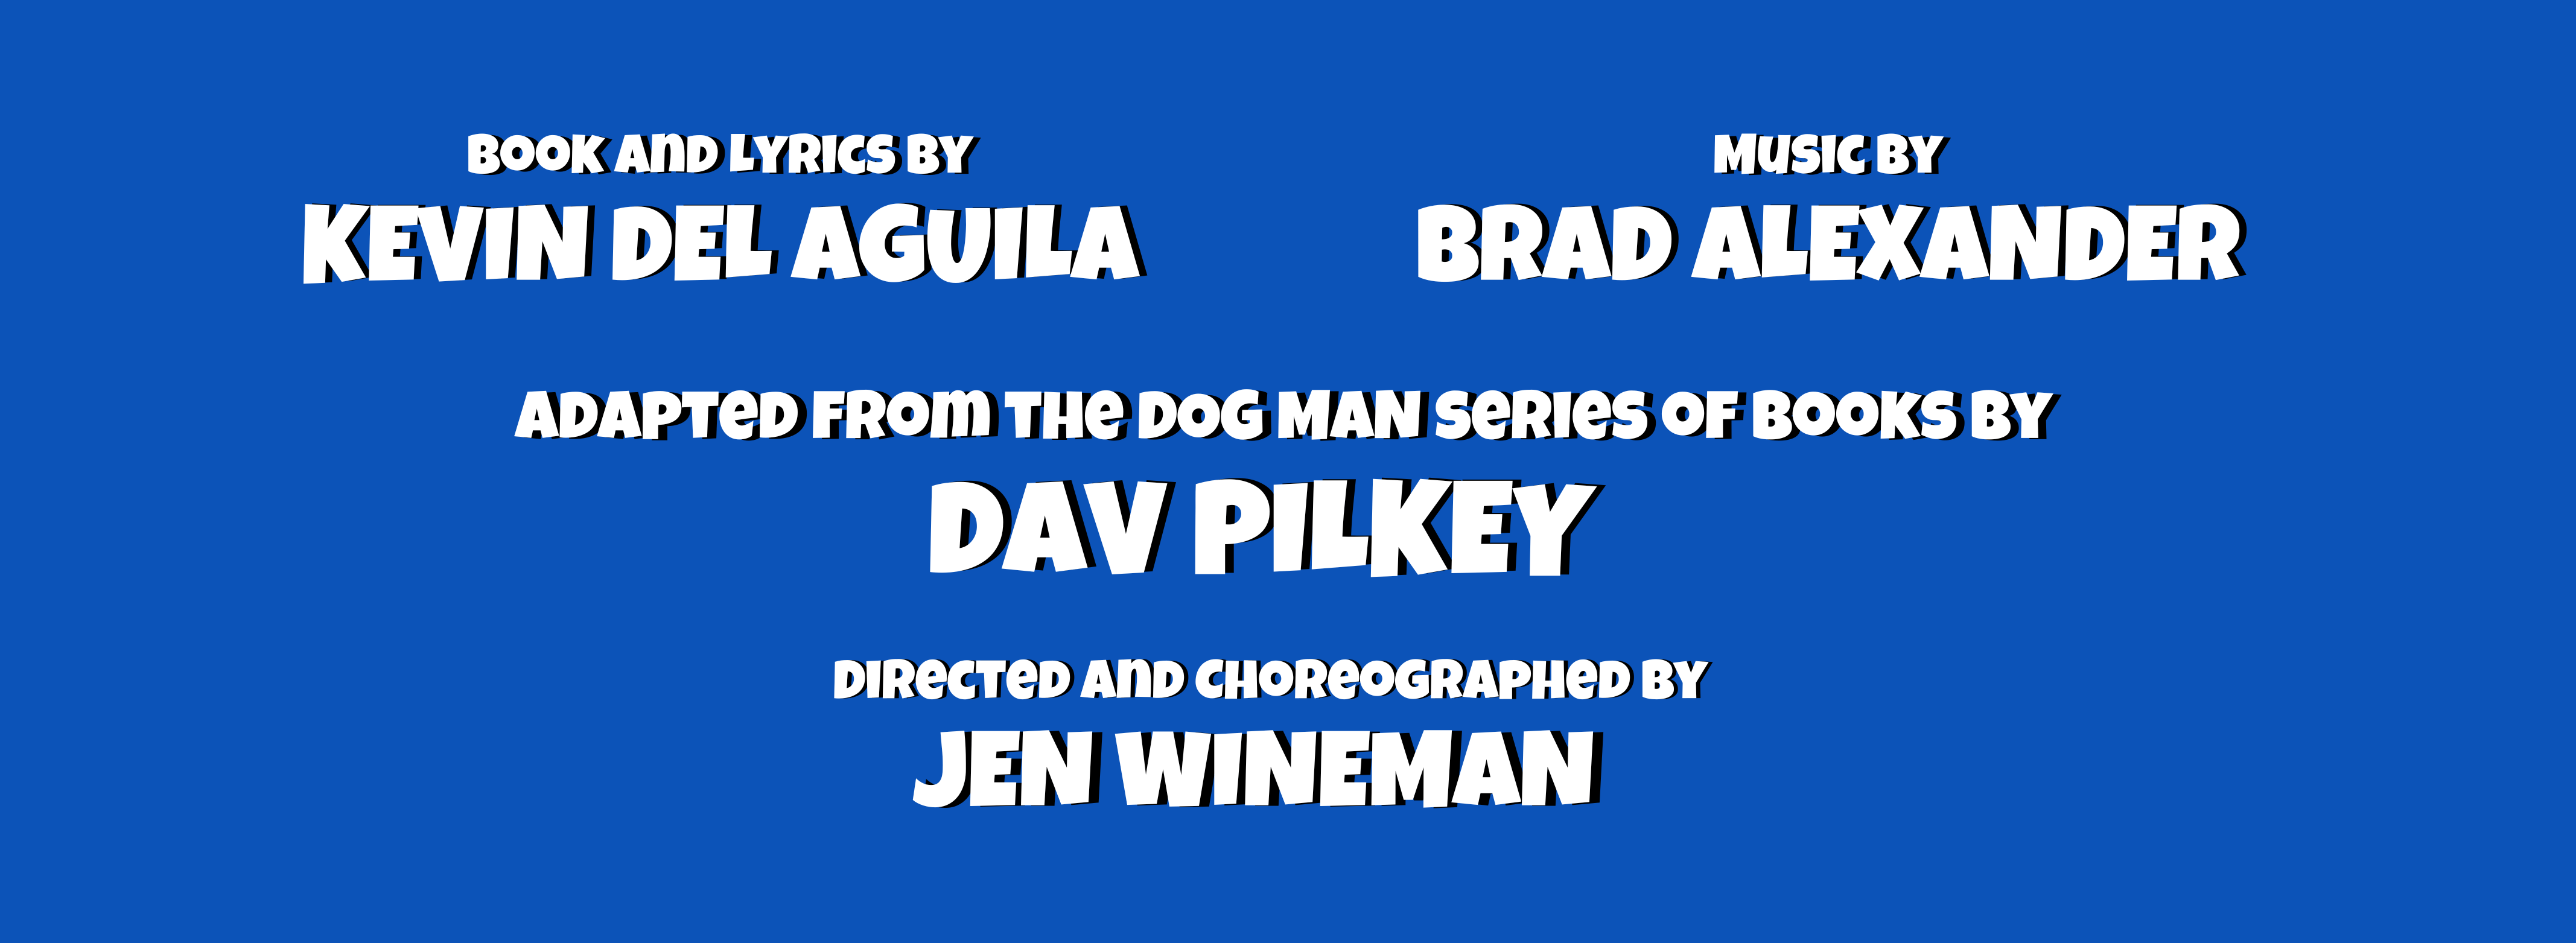 Book and Lyrics by Kevin Del Aguila, Music by Brad Alexander, Adapted from the Dog Man series of books by Dav Pilkey